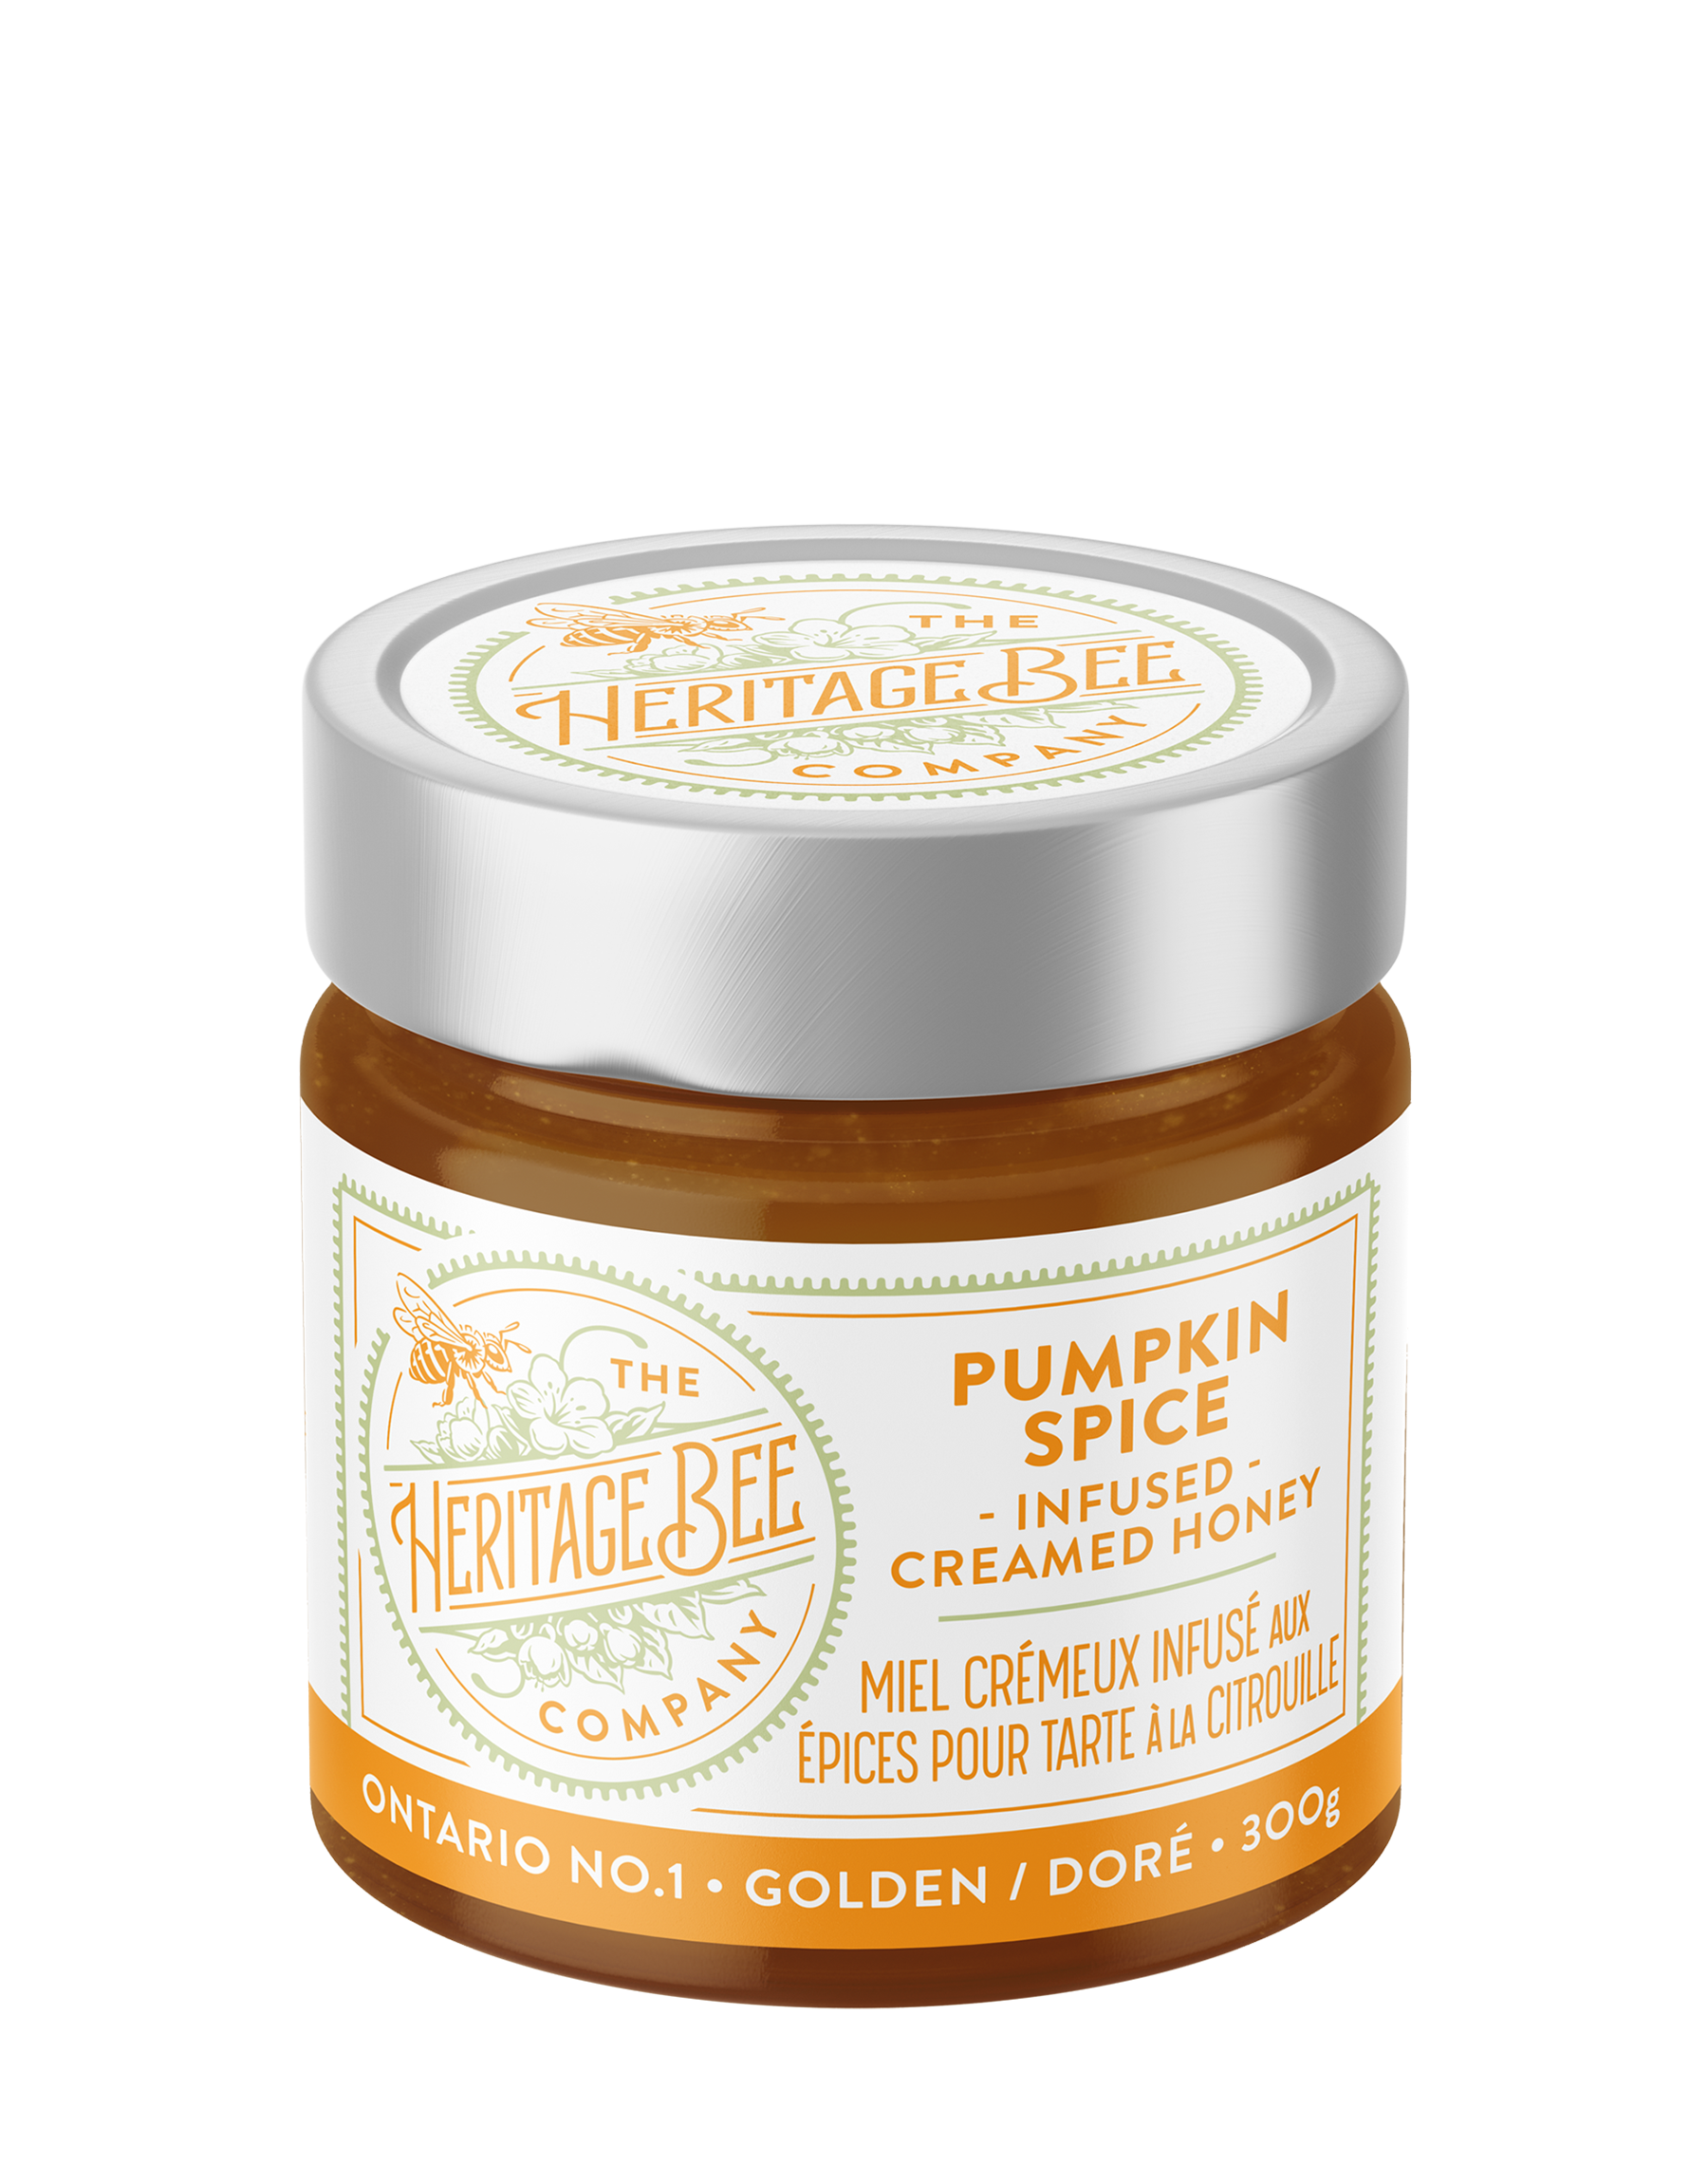 Heritage Bee Co local creamed wildflower honey infused with pumpkin spice. Handcrafted in Ontario and perfect for fall. Premium. Gourmet.